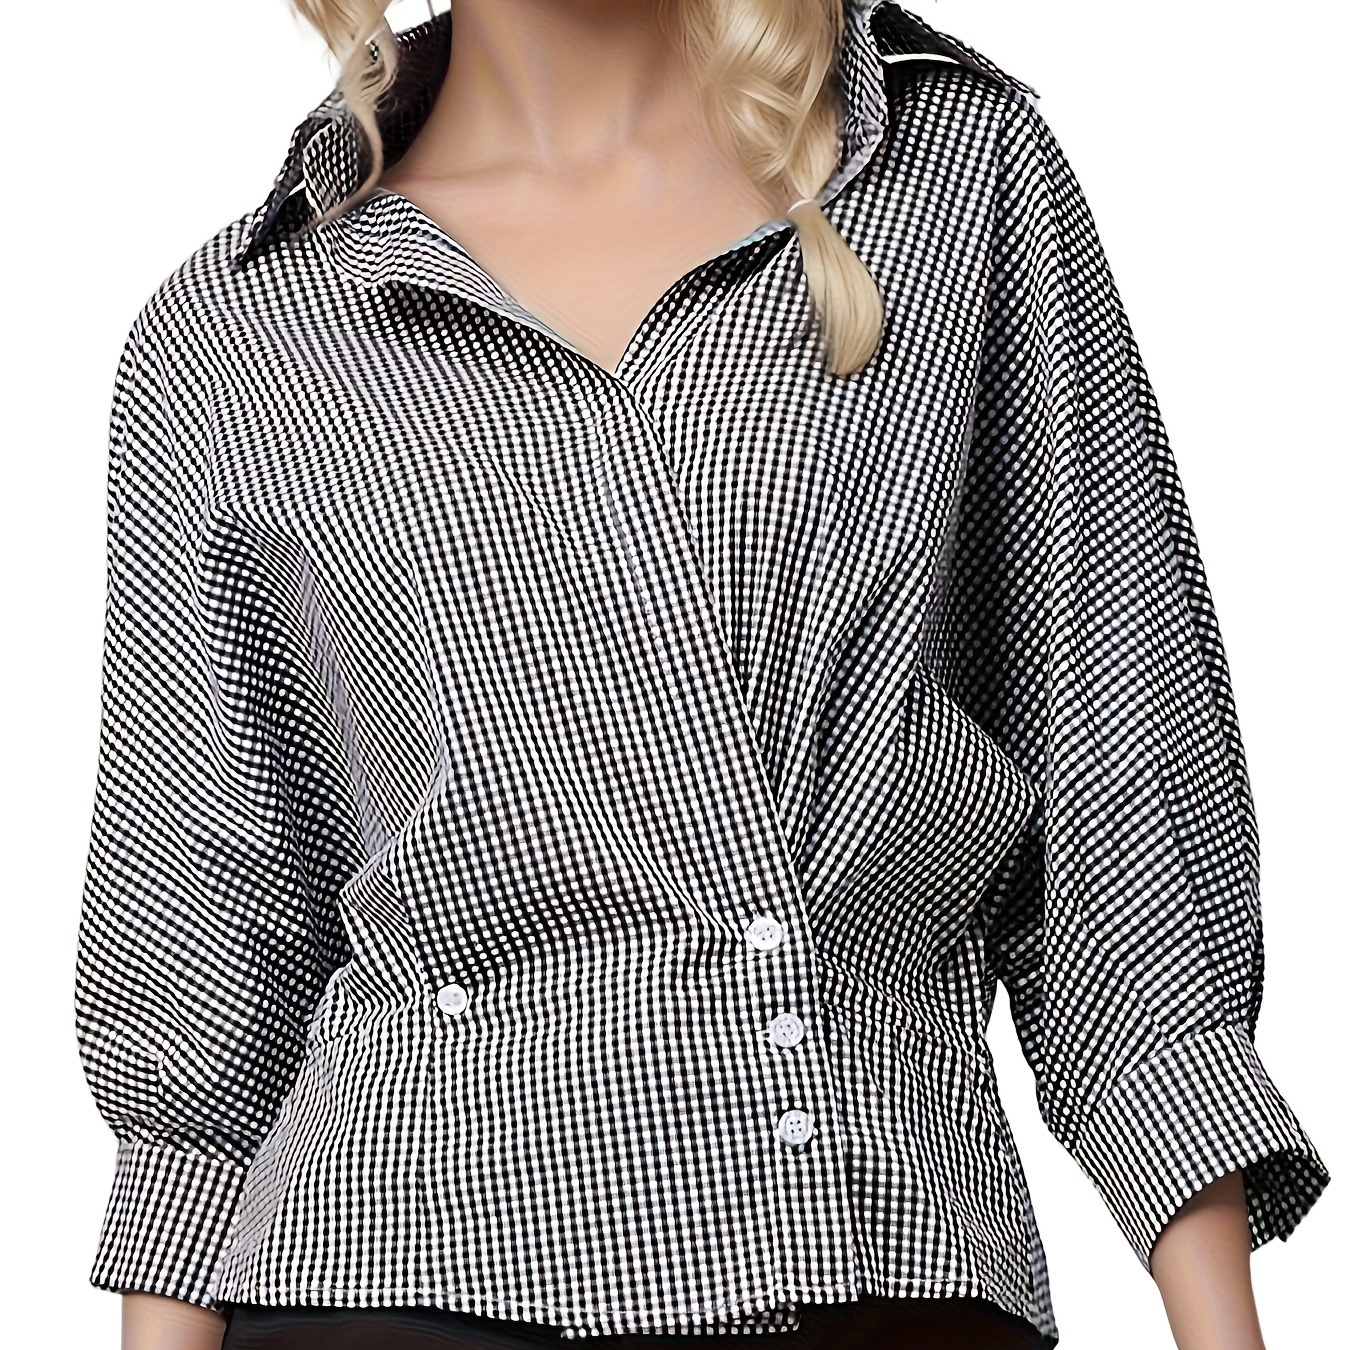 

Plaid Print Button Front Blouse, Stylish Batwing Sleeve Lapel Blouse For Spring & Fall, Women's Clothing